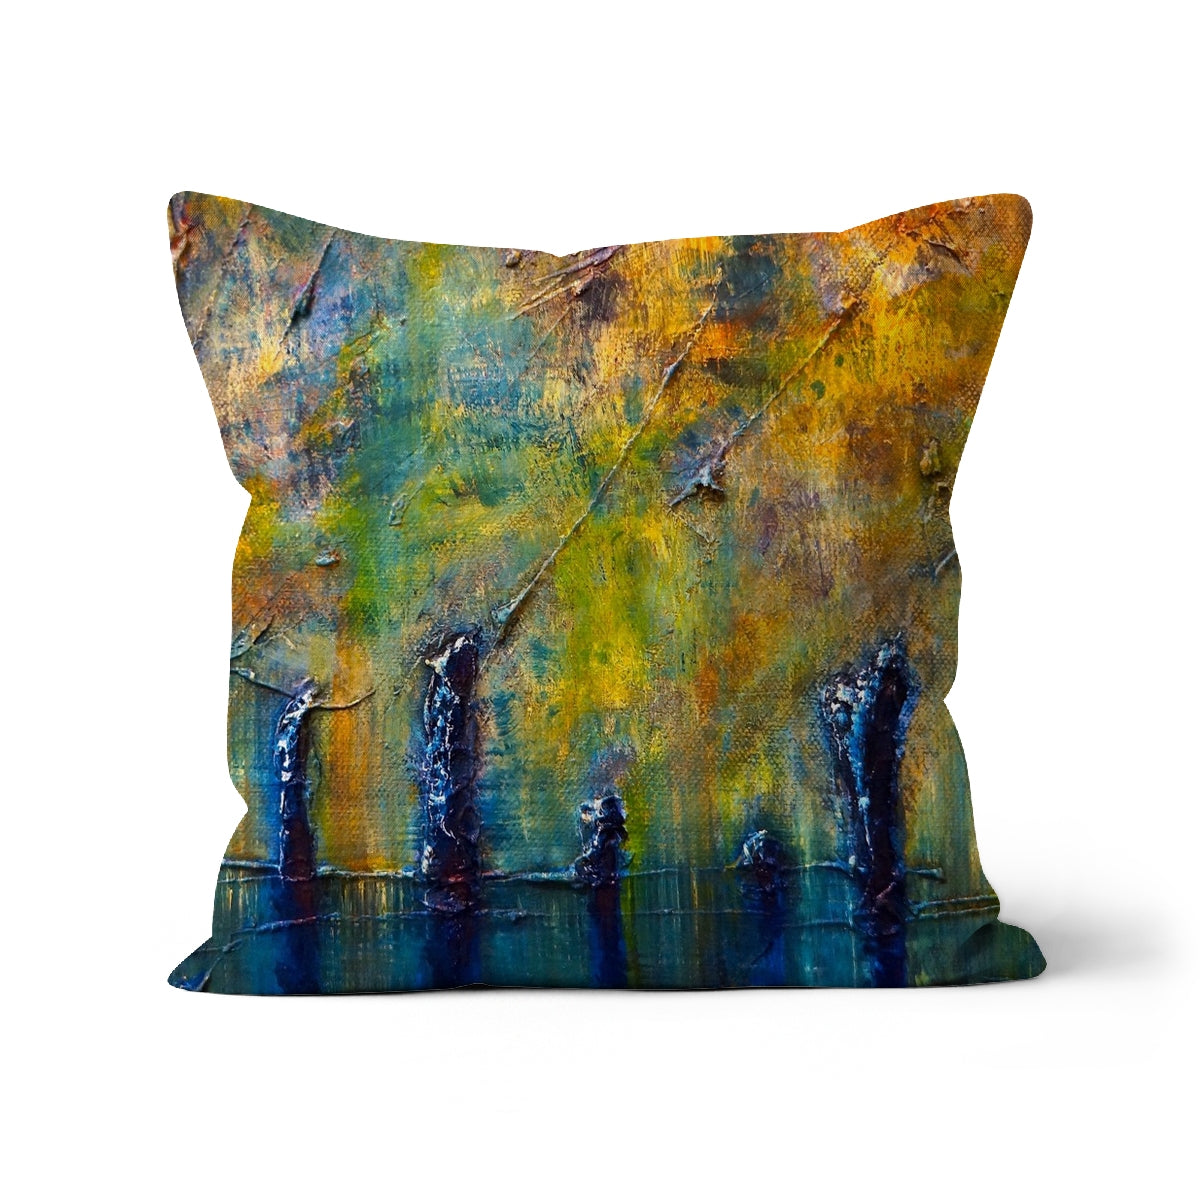 Stenness Moonlight Orkney Art Gifts Cushion-Cushions-Orkney Art Gallery-Faux Suede-22"x22"-Paintings, Prints, Homeware, Art Gifts From Scotland By Scottish Artist Kevin Hunter